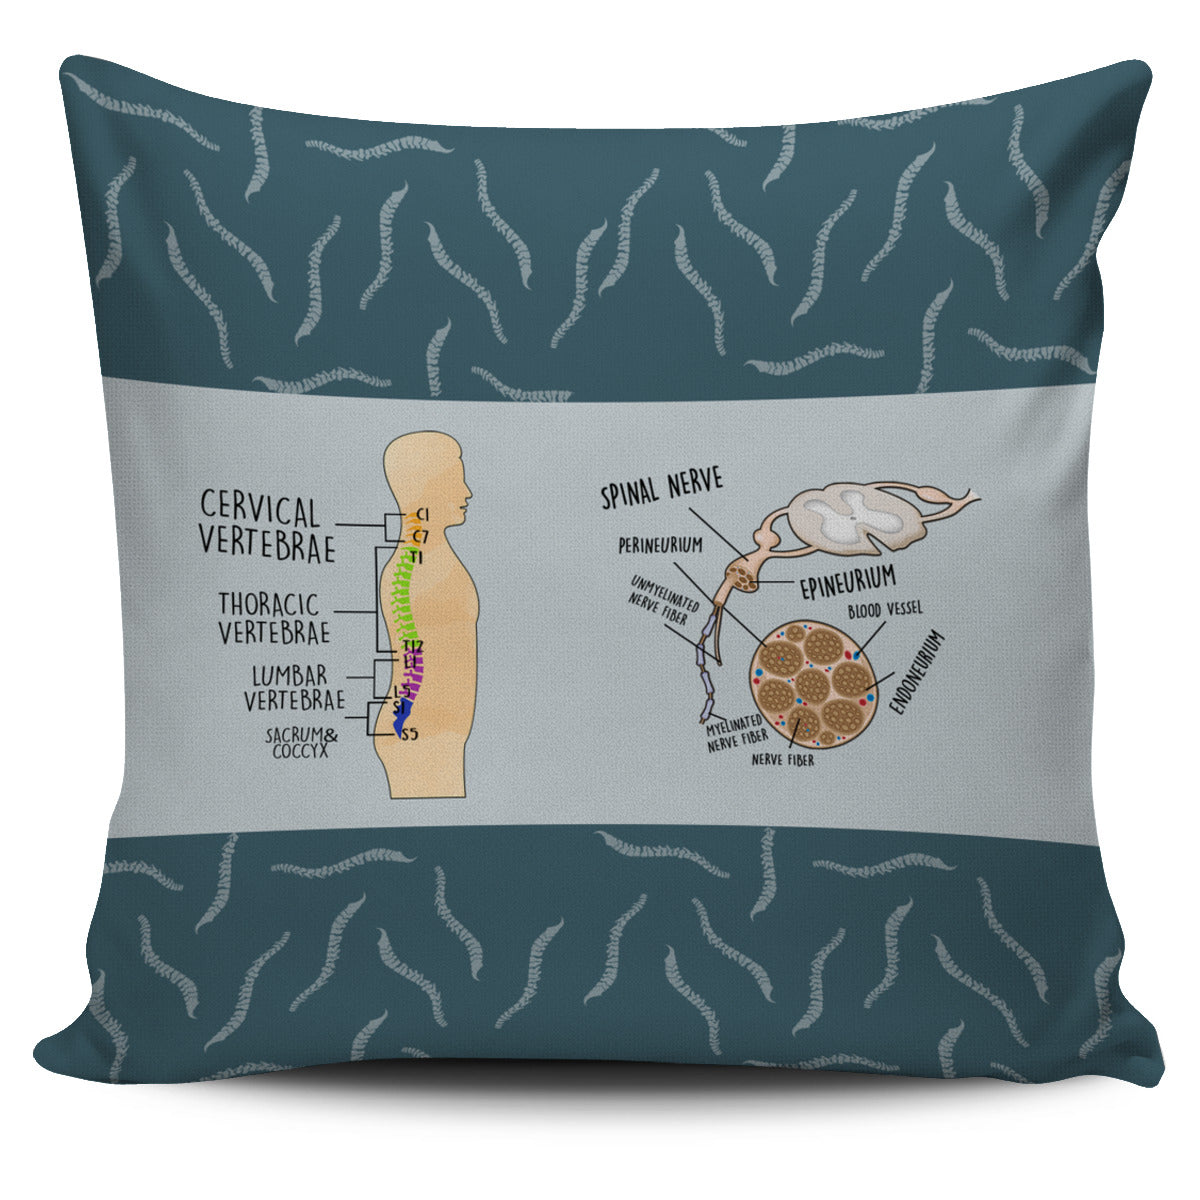 Chiropractor Pillow Cover